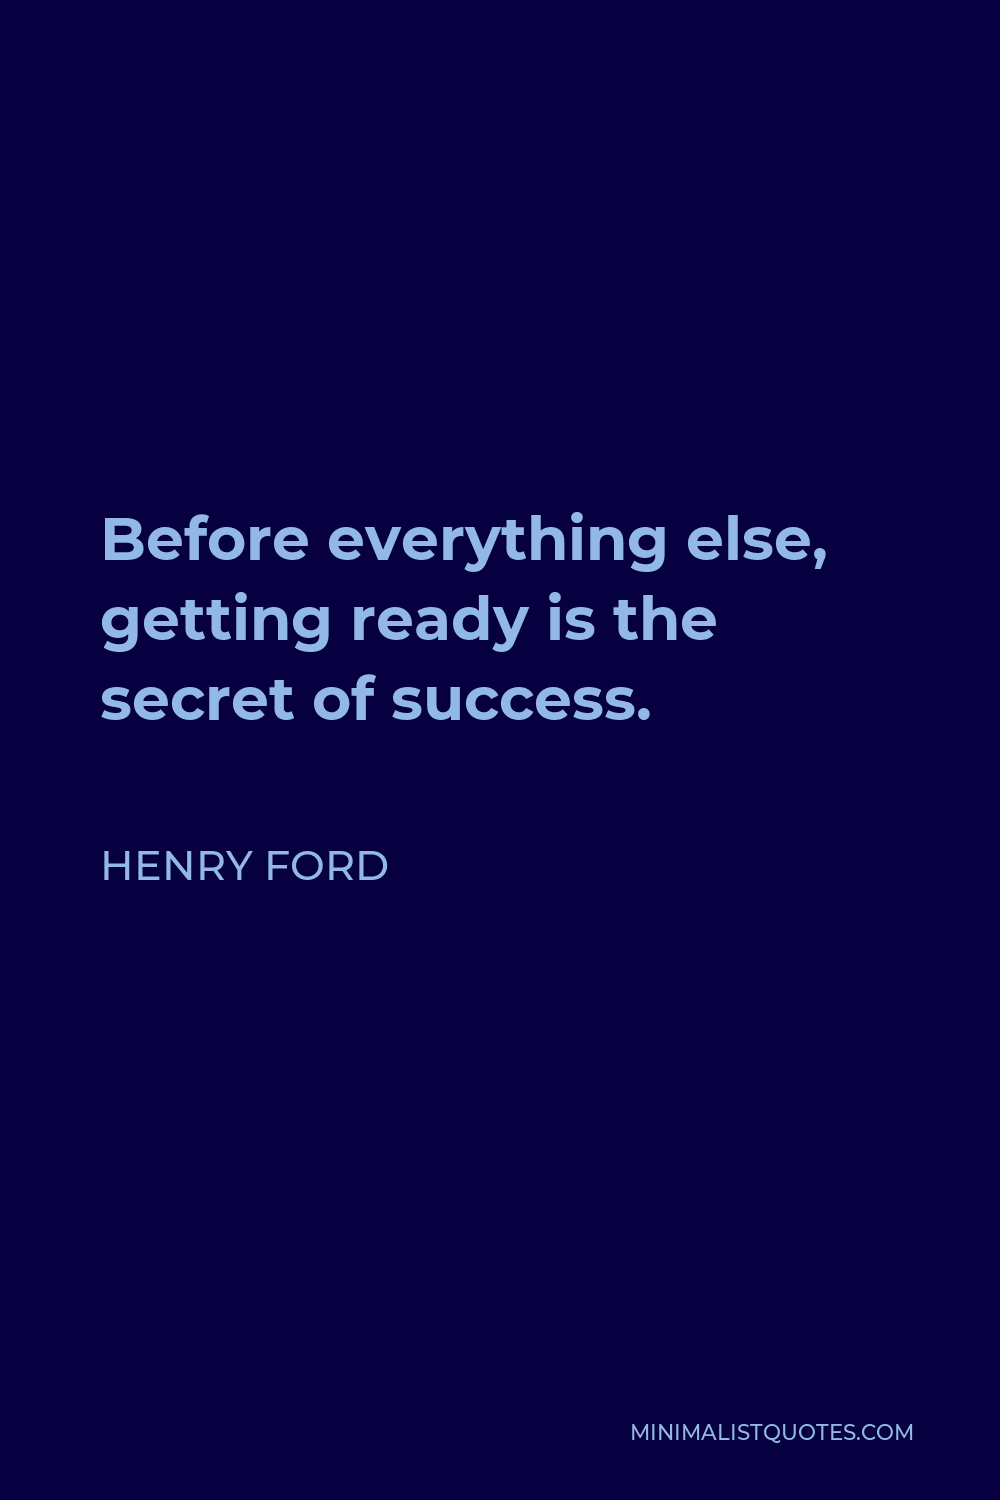 Henry Ford Quote - Before everything else, getting ready is the secret of success.